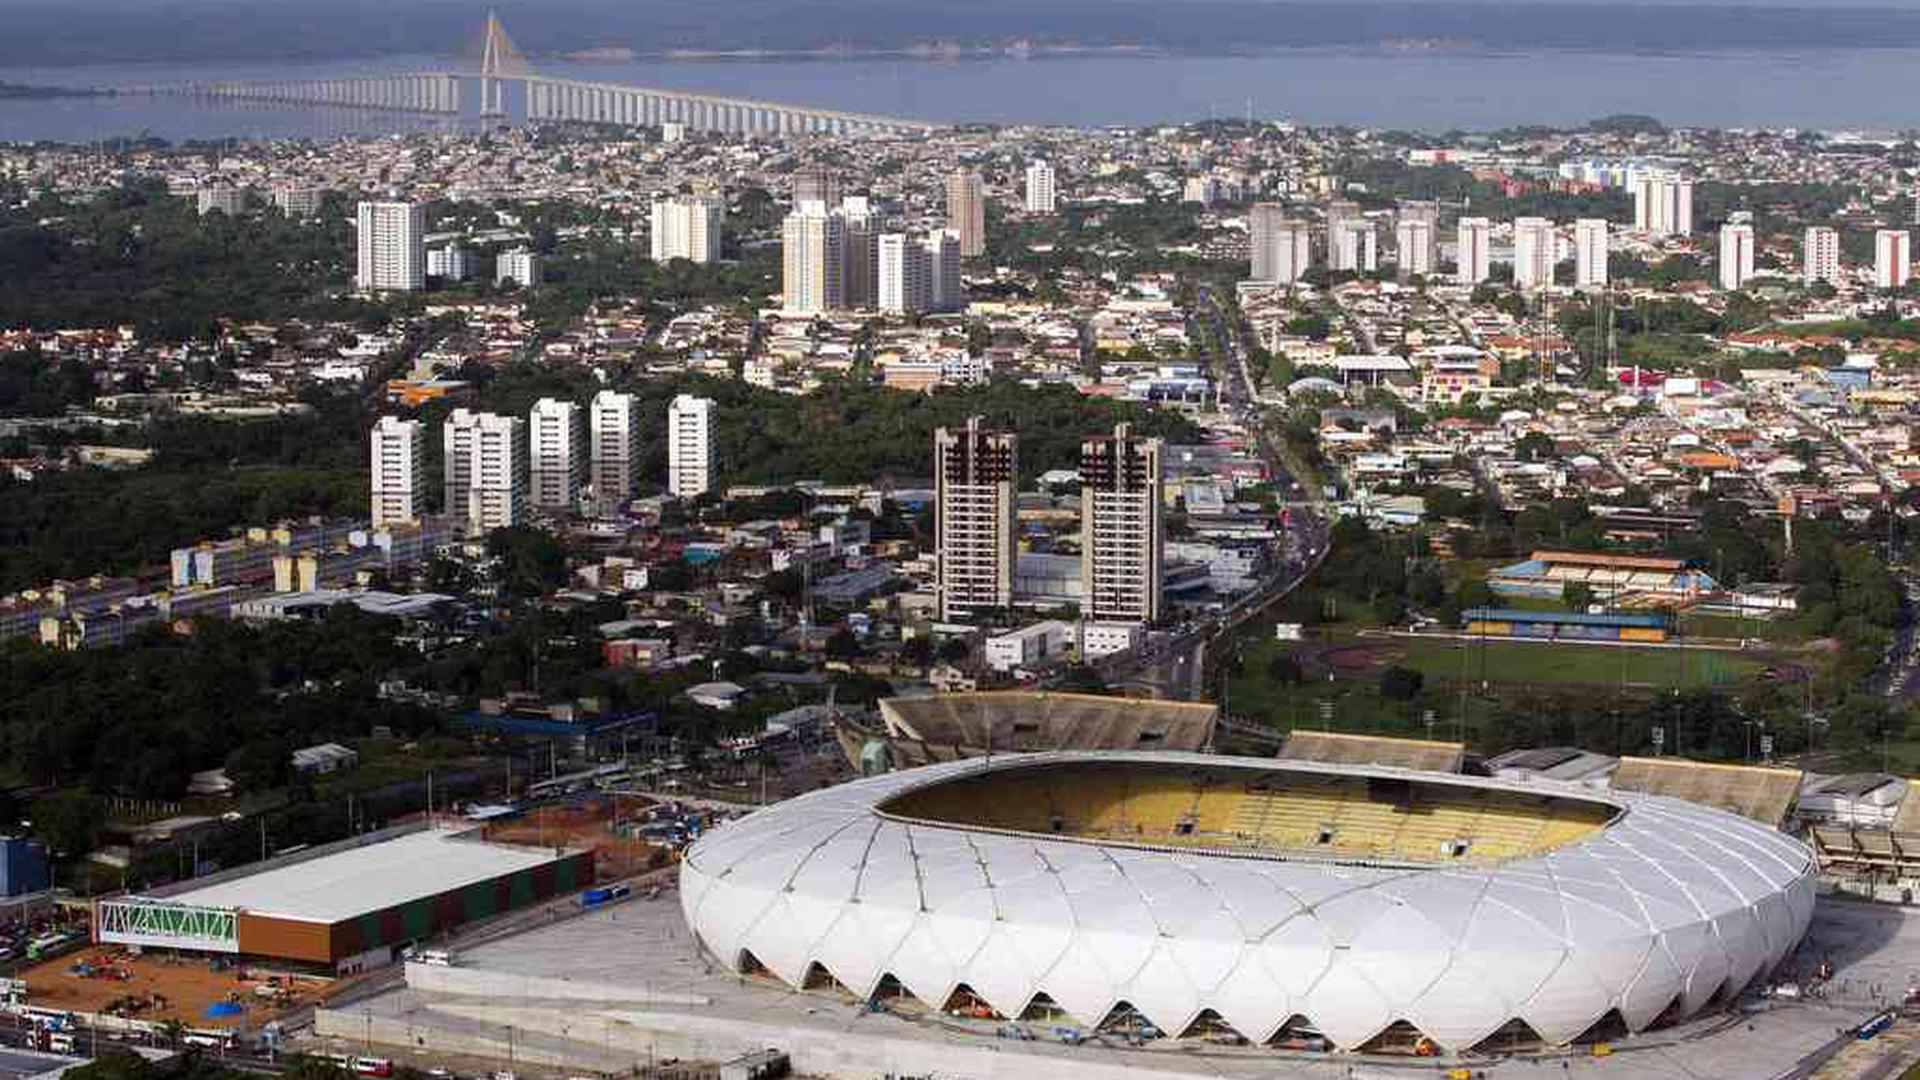 The Arena Amazonia soccer stadium is seen in this aerial view taken two days before its scheduled inauguration, in Manaus, in this file picture taken March 7, 2014. Manaus is best known as a stopover for travelers on the way to and from eco tours in Brazil's Amazon rainforest, but in many ways it is more like a bustling frontier outpost of the modern, industrial world on a distant, jungle planet. Soccer fans should be prepared to sweat when Manaus hosts four World Cup games in June in the new $300 million stadium that looks destined to become a white elephant. Arena Amazonia is the venue for England vs Italy, Cameroon vs Croatia, USA vs Portugal and Honduras vs Switzerland. To match Trip Tips TRAVEL-MANAUS/     REUTERS/Bruno Kelly/Files (BRAZIL - Tags: SPORT SOCCER WORLD CUP TRAVEL CITYSCAPE)